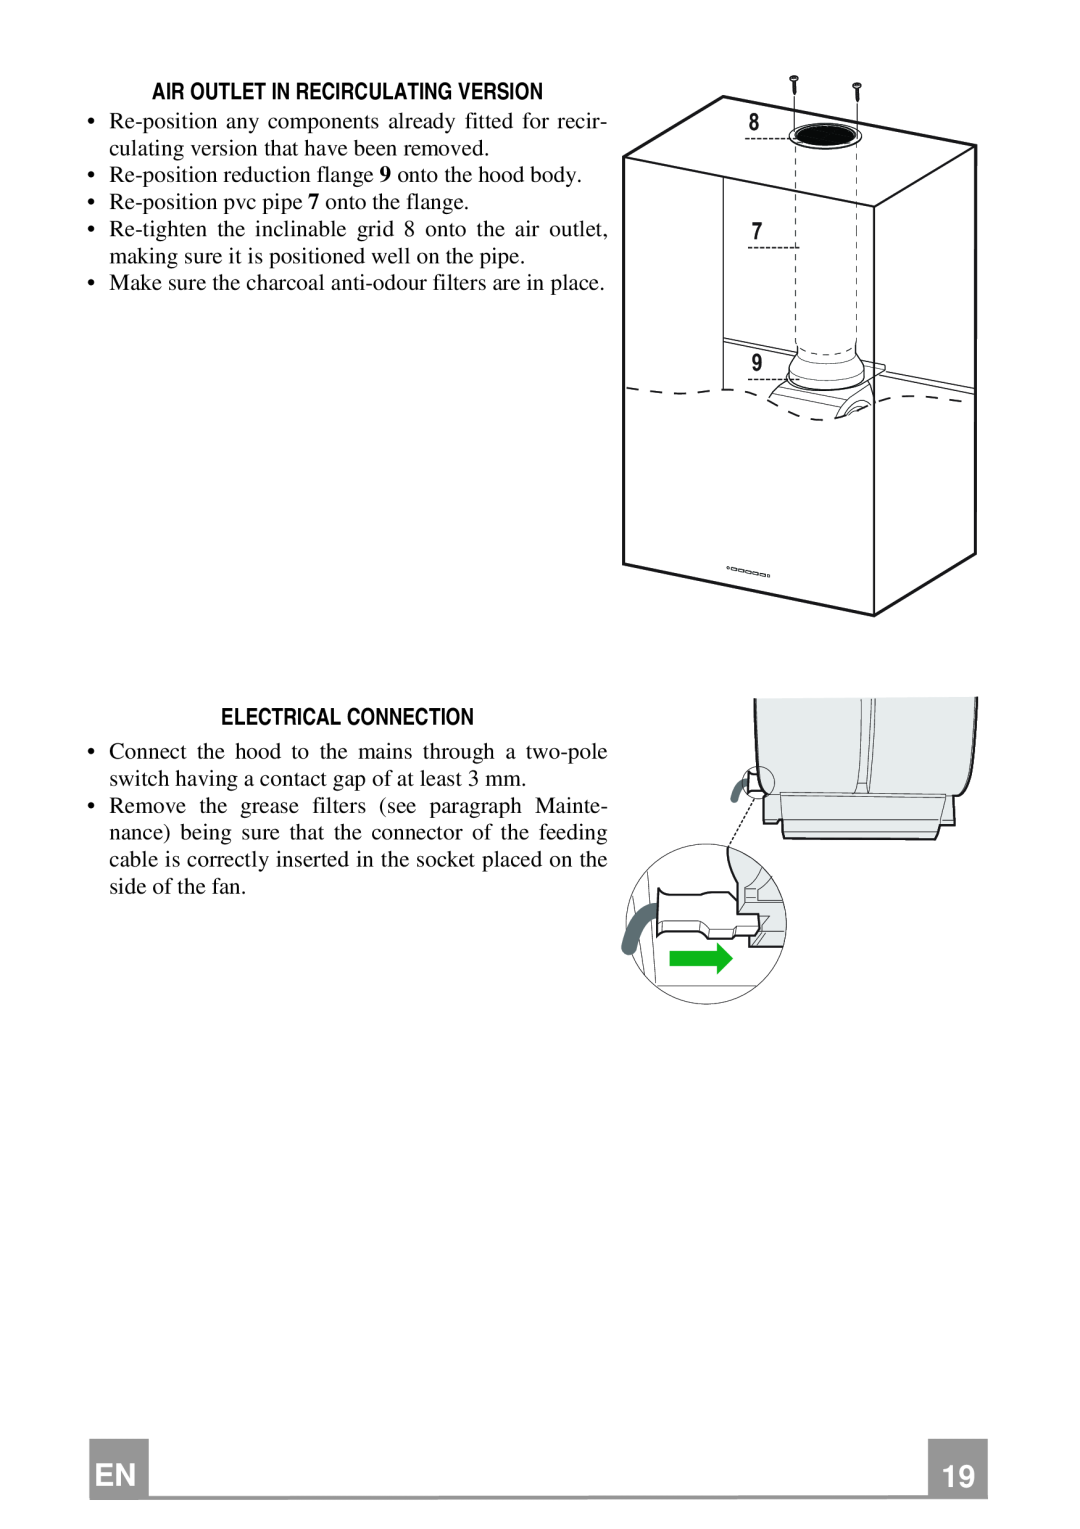 Franke Consumer Products FPL 906, FPL 606 manual Air Outlet In Recirculating Version, Electrical Connection 